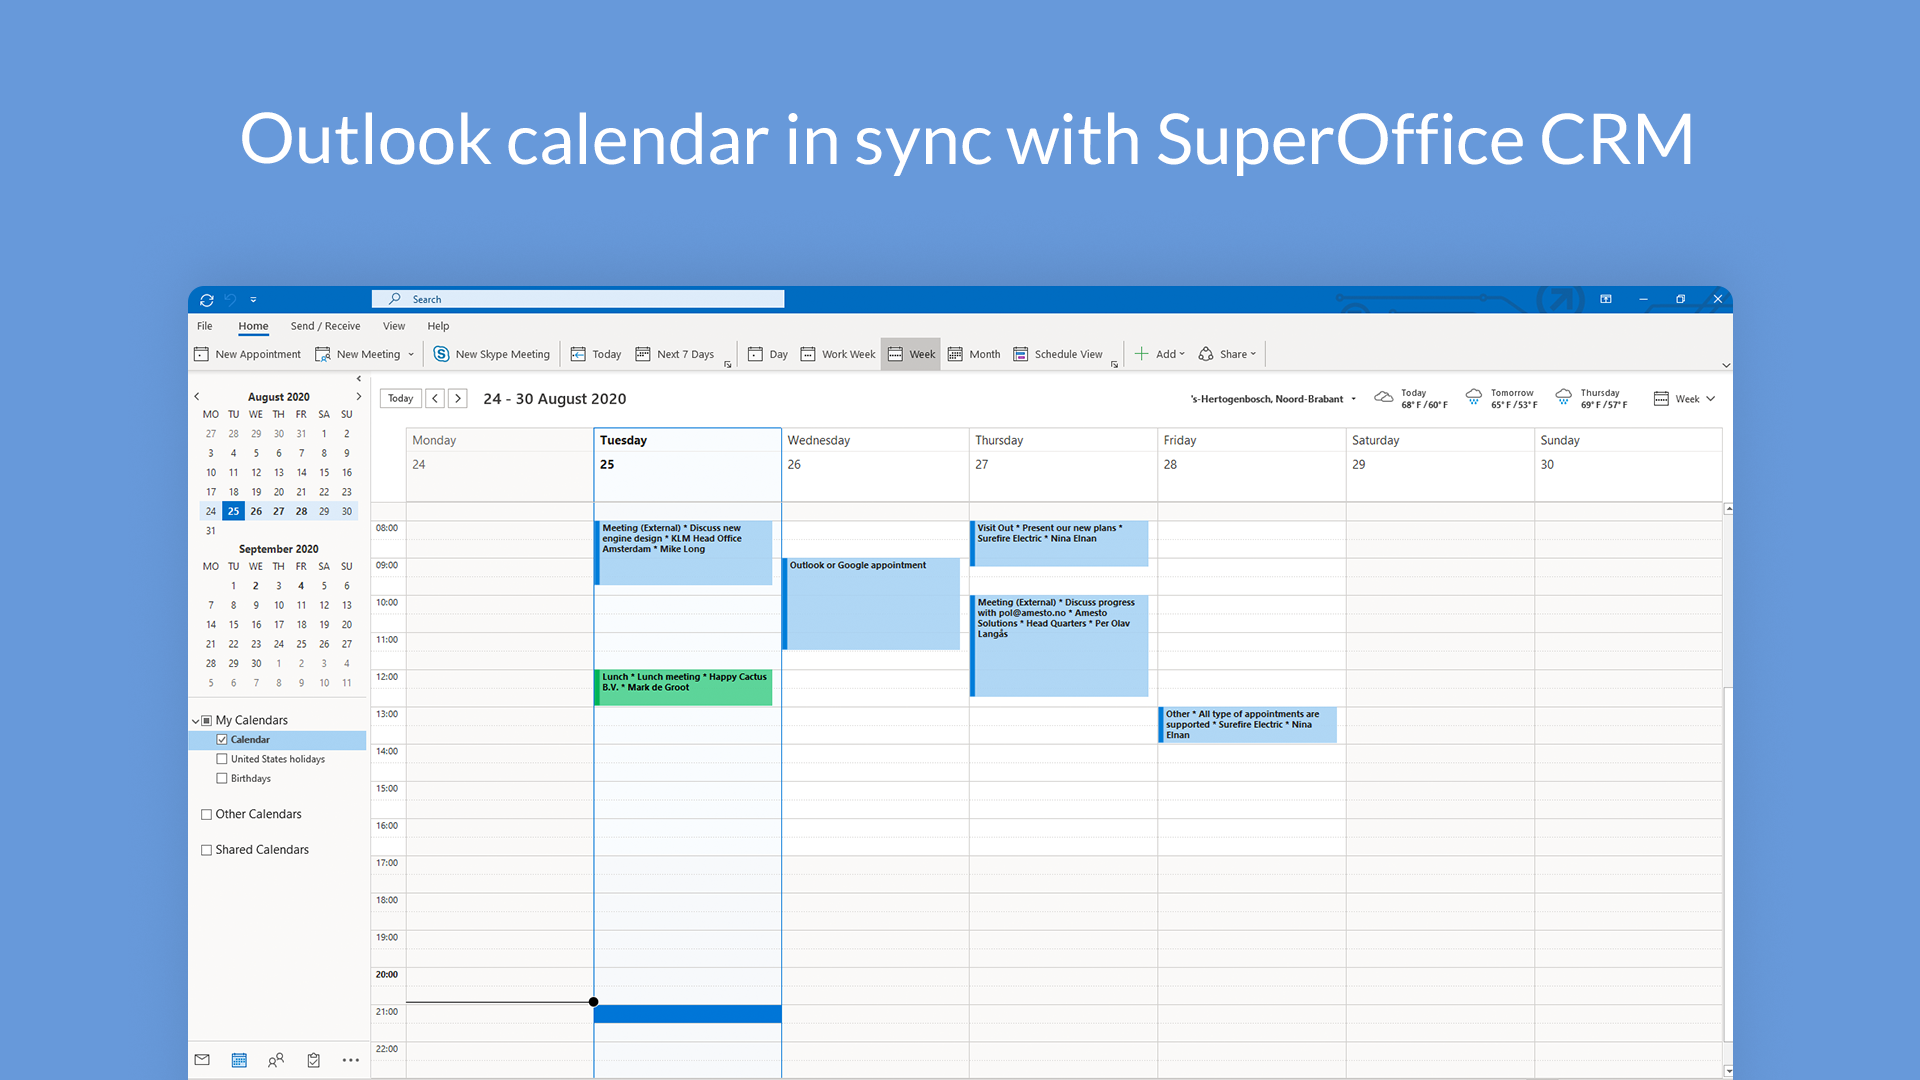 Outlook calendar in sync with SuperOffice CRM